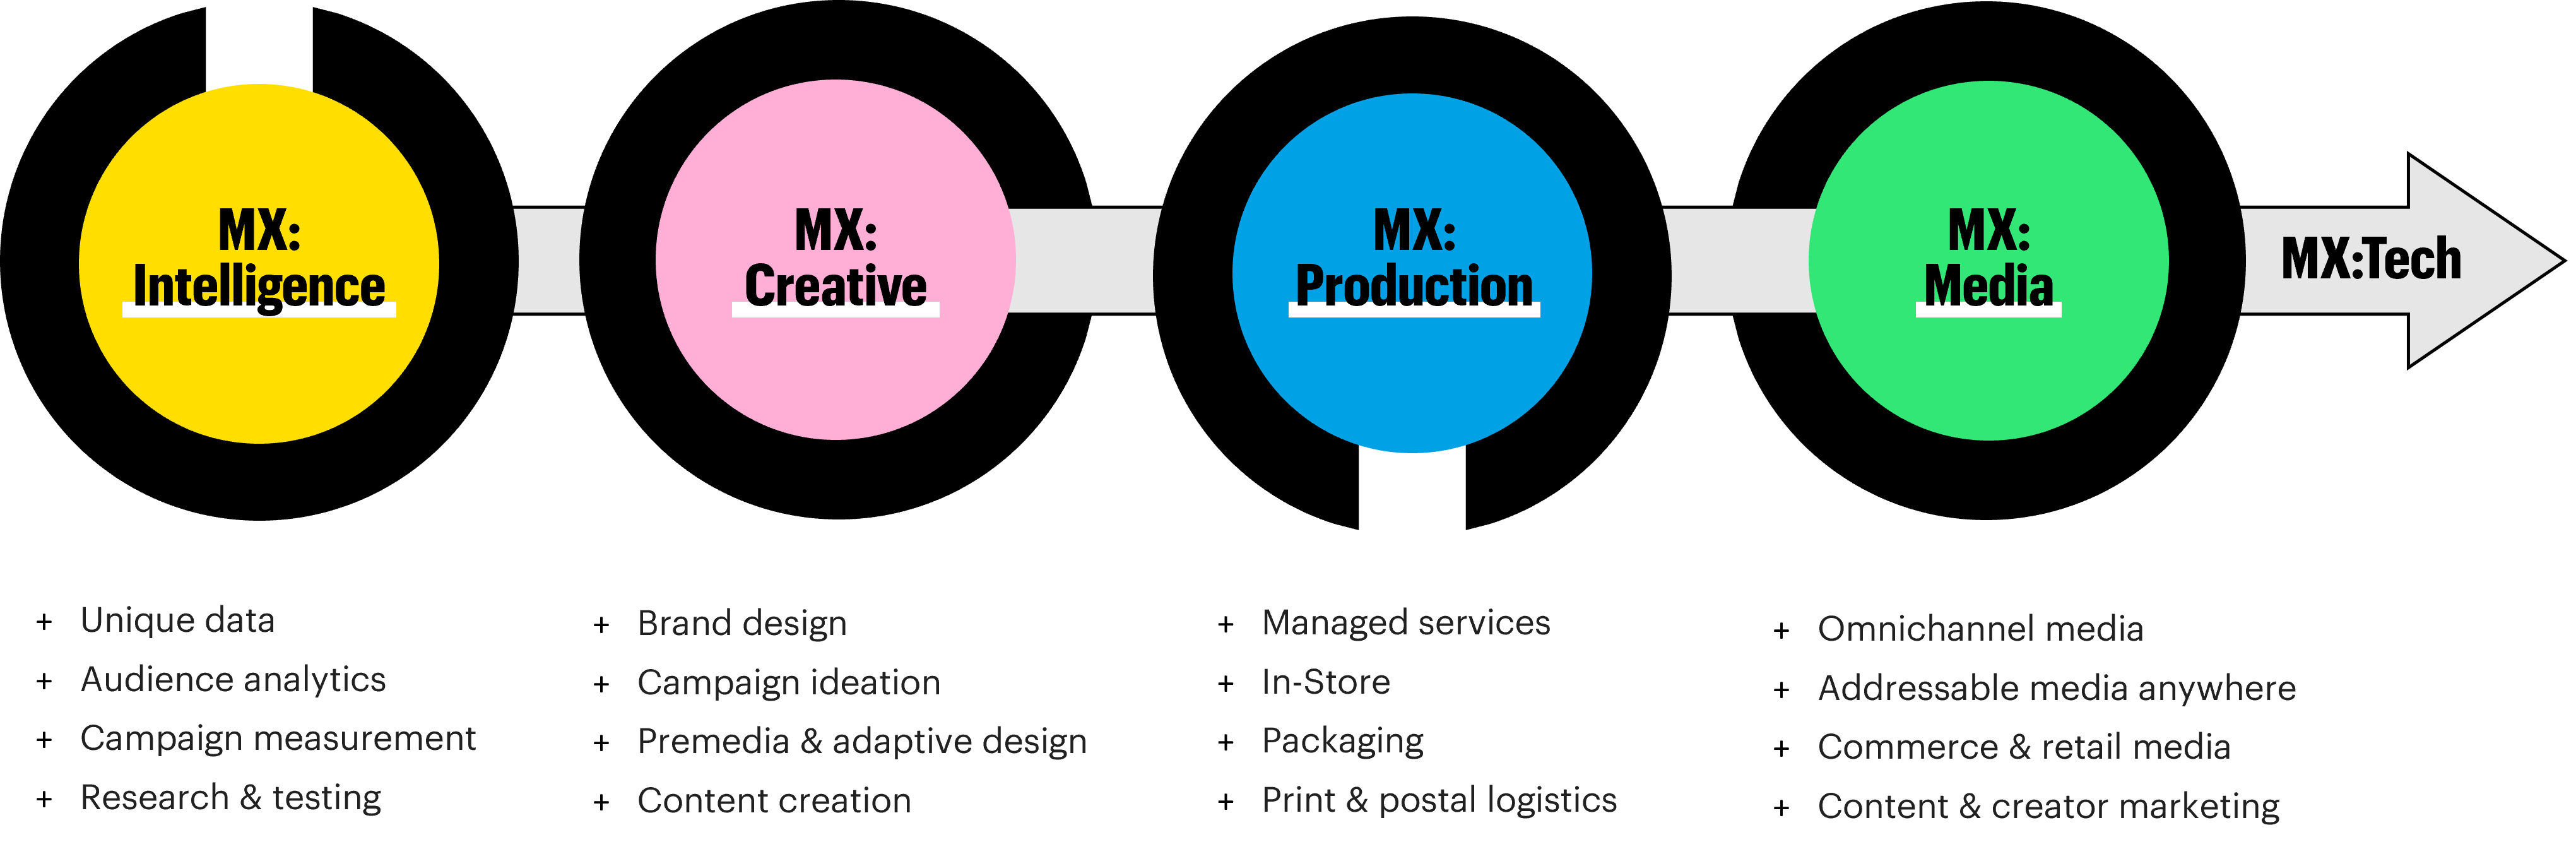 MX solution suite graphic featuring Intelligence, Creative, Production, Media, and Tech